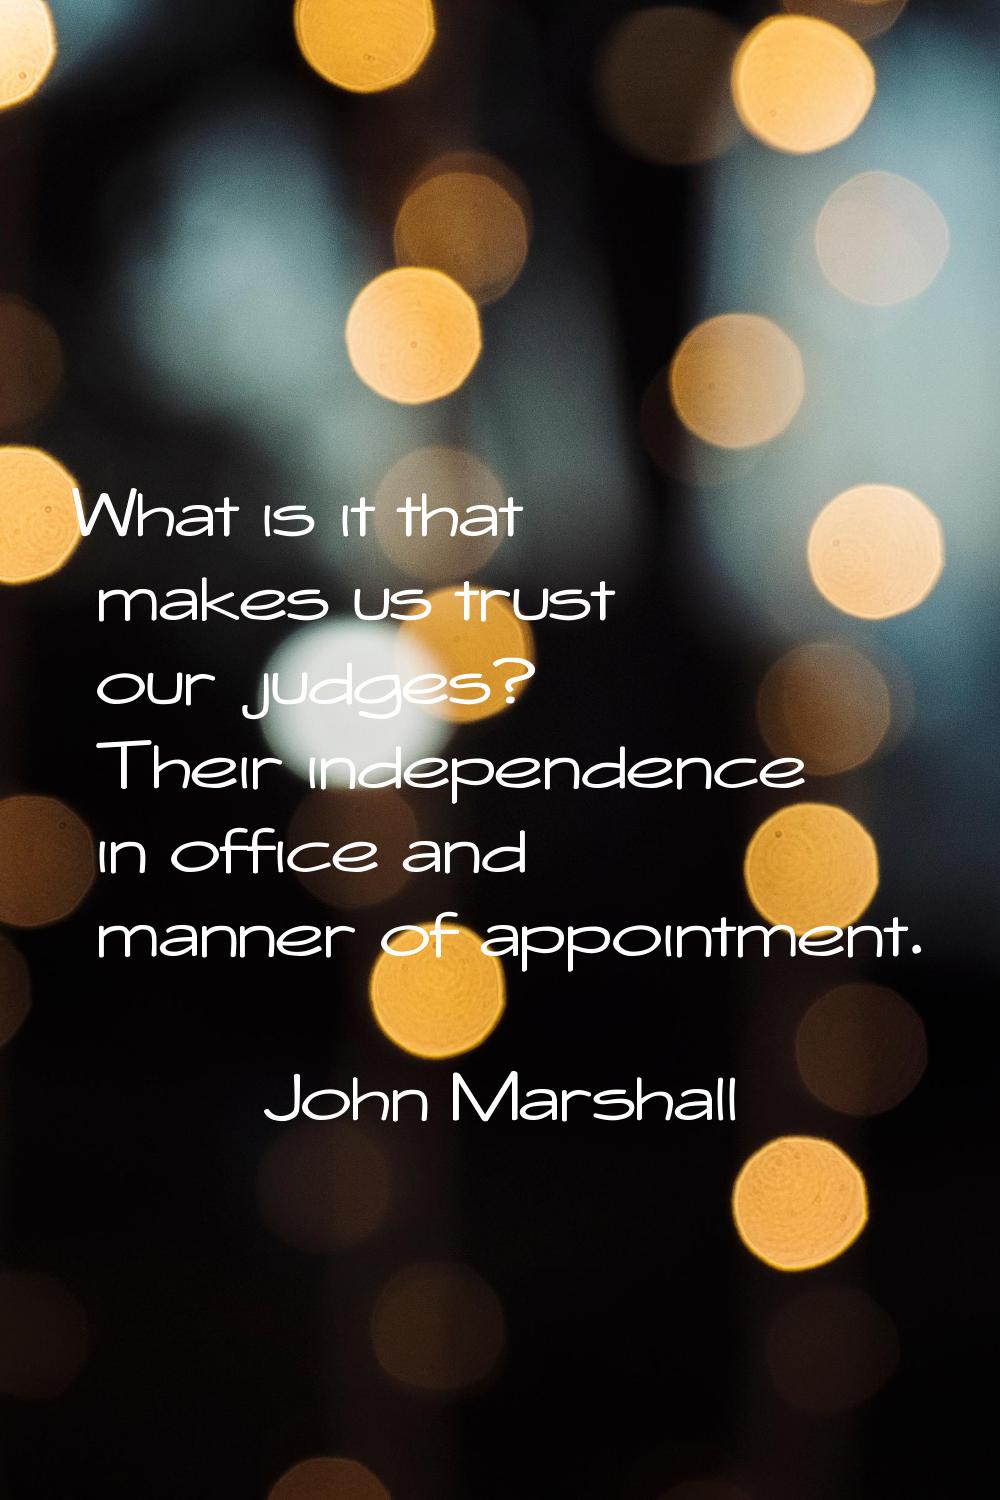 What is it that makes us trust our judges? Their independence in office and manner of appointment.